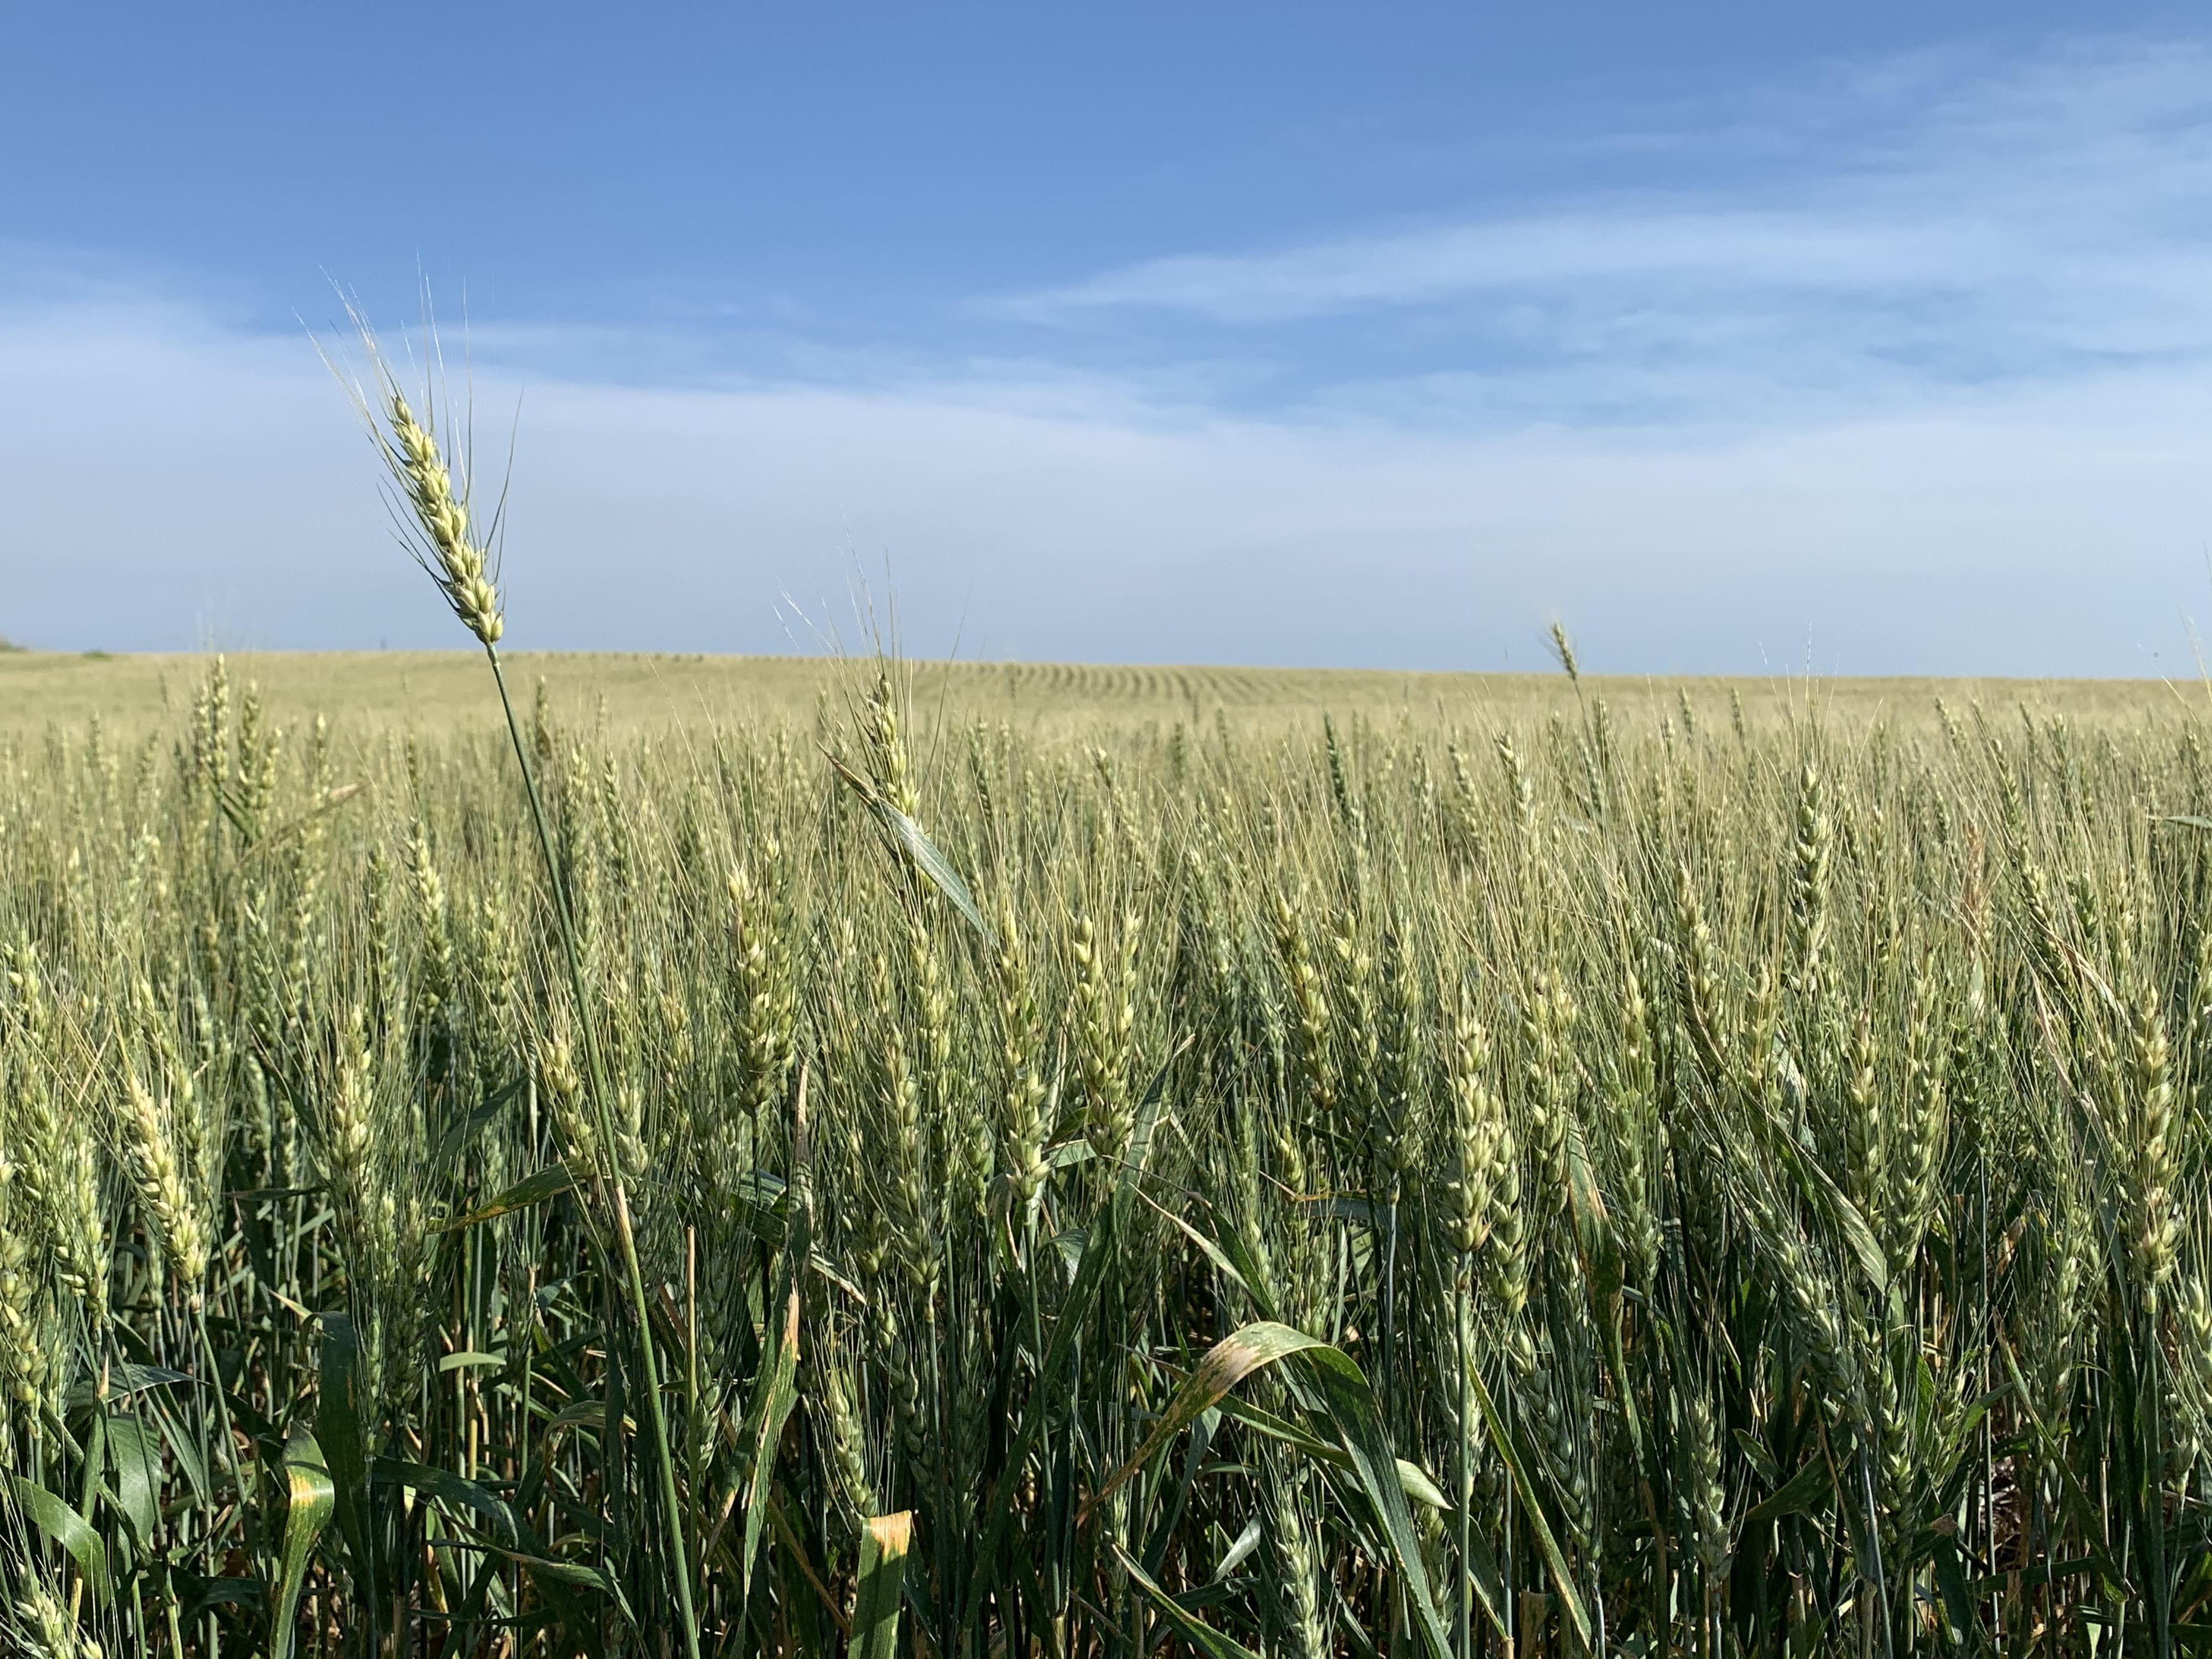 Mid-morning Ag News, February 4, 2022: Best of the Best in Wheat Research and Marketing meeting to be held in Minot